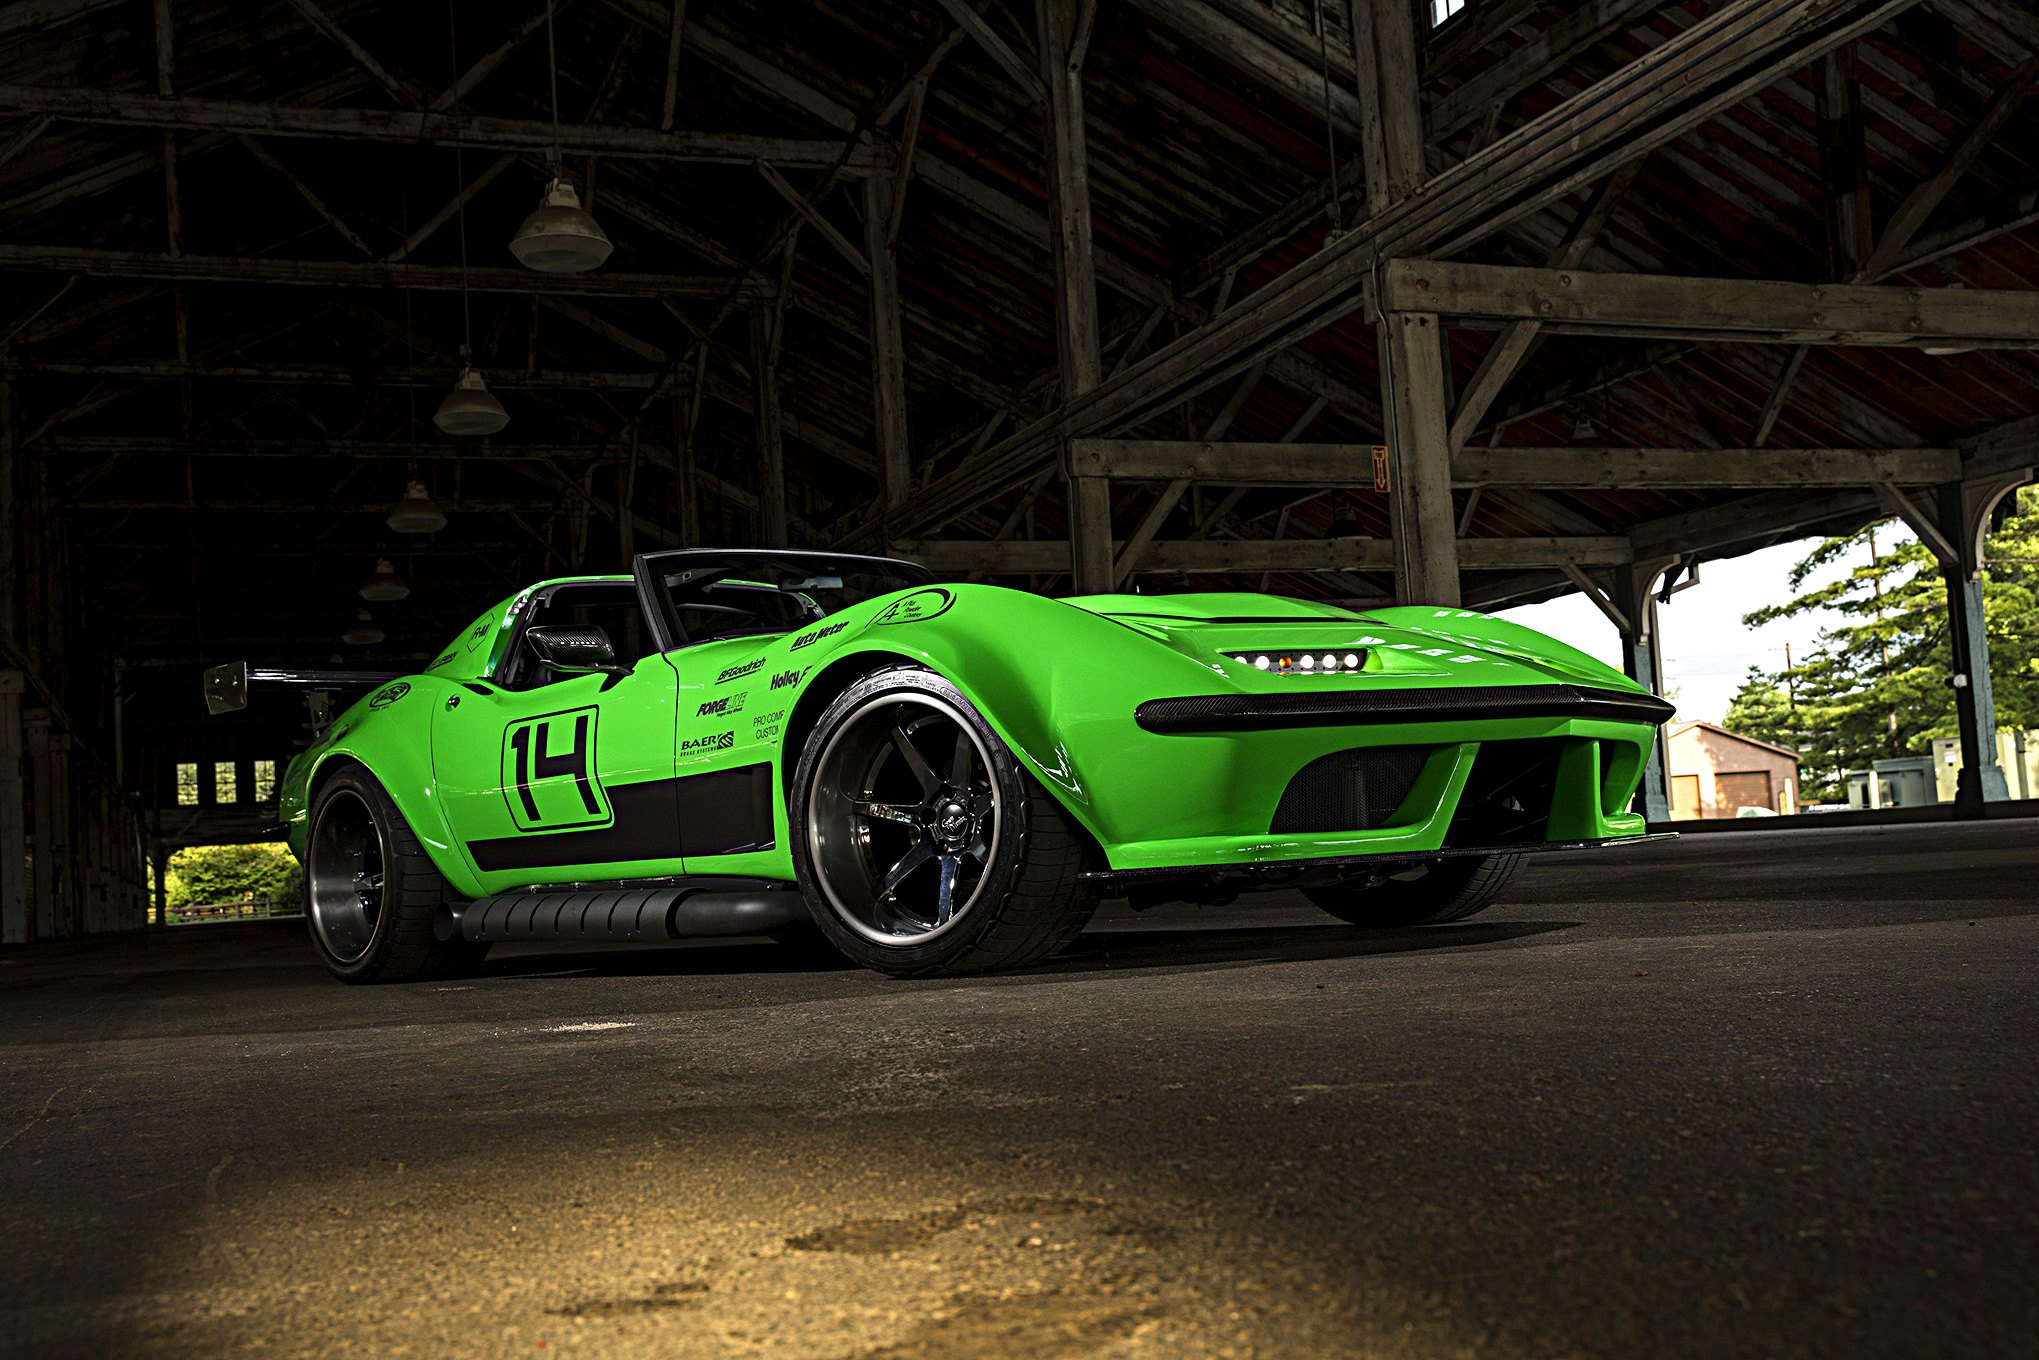 Custom Green Debadged Chevy Corvette with Carbon Fiber Accents - Photo by Robert McGaffin